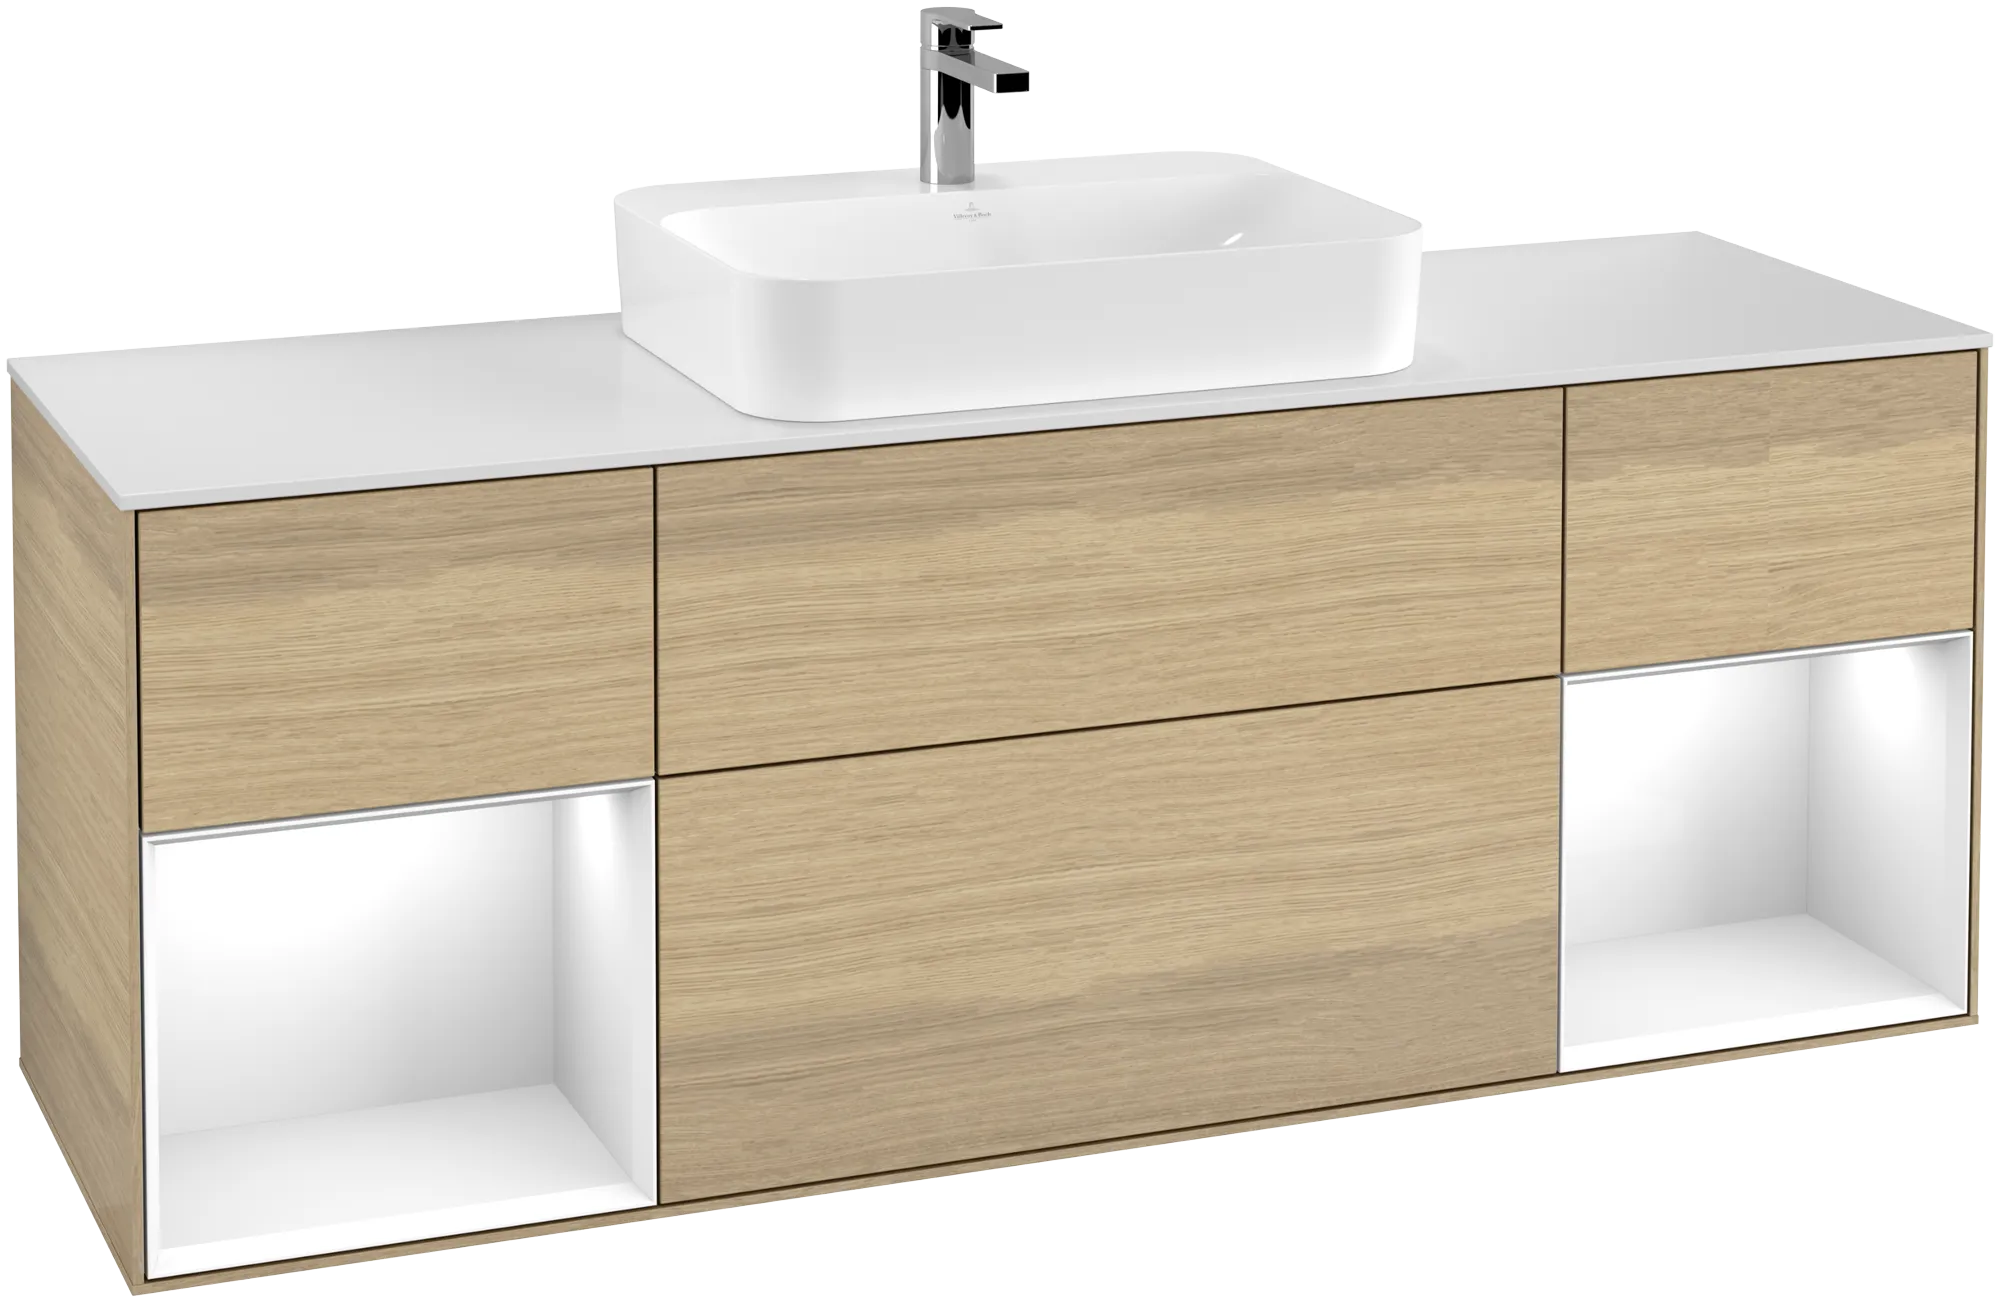 VILLEROY BOCH Finion Vanity unit, with lighting, 4 pull-out compartments, 1600 x 603 x 501 mm, Oak Veneer / Glossy White Lacquer / Glass White Matt #G451GFPC resmi